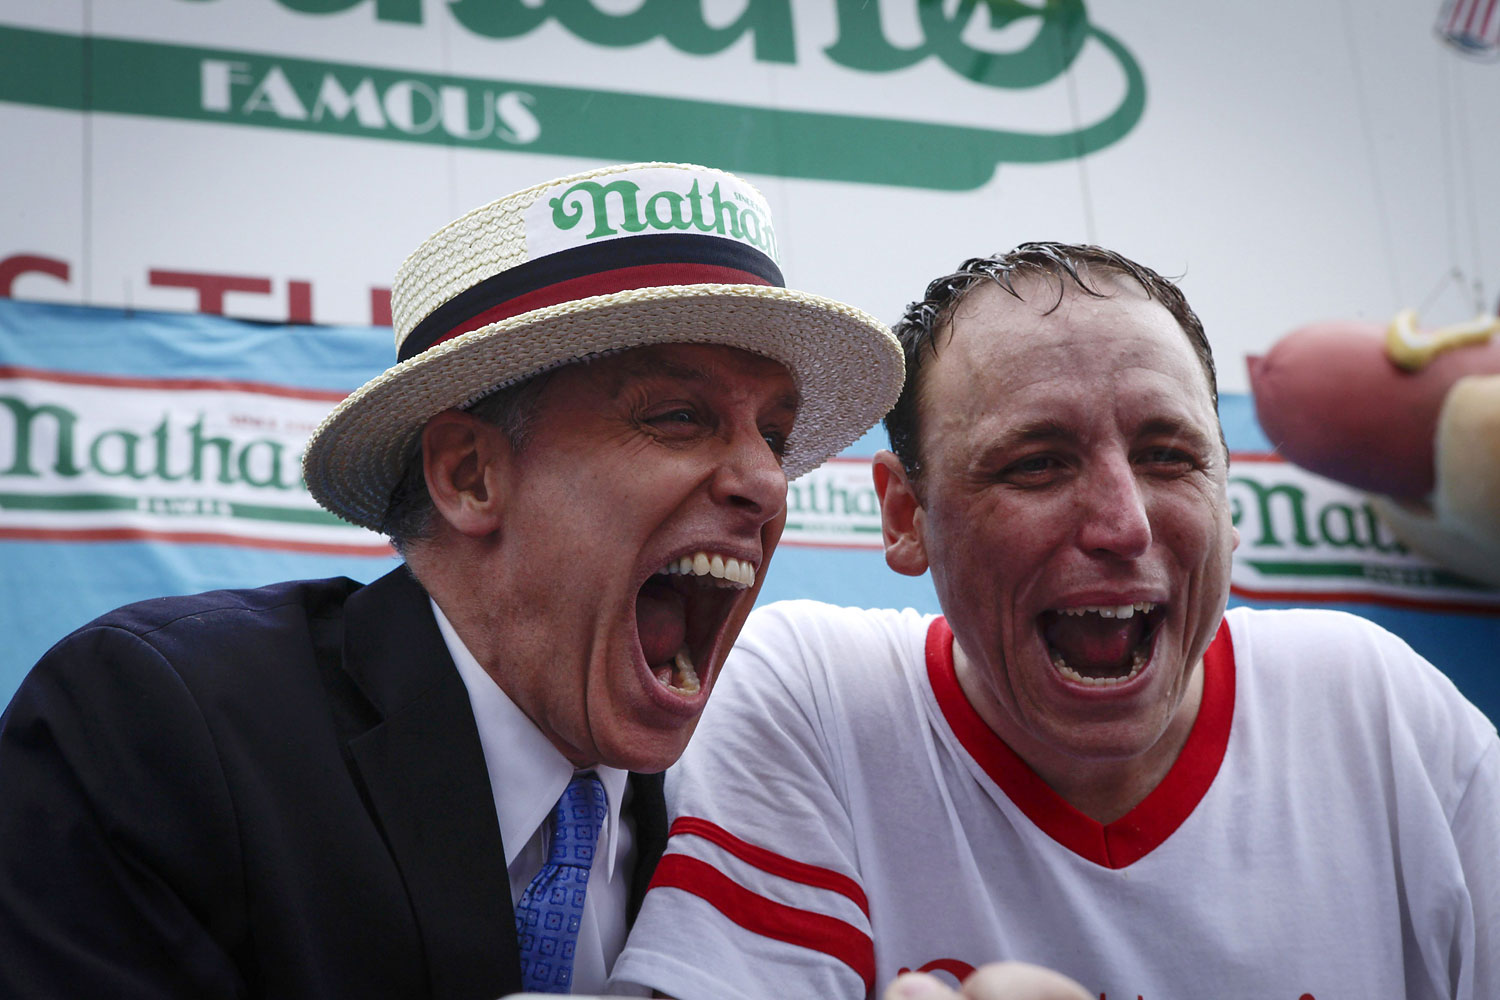 Joey Chestnut, right, and George Shea celebrate after Chestnut wins the 98th annual 2014 Nathan's Famous Hot Dog Eating Contest.